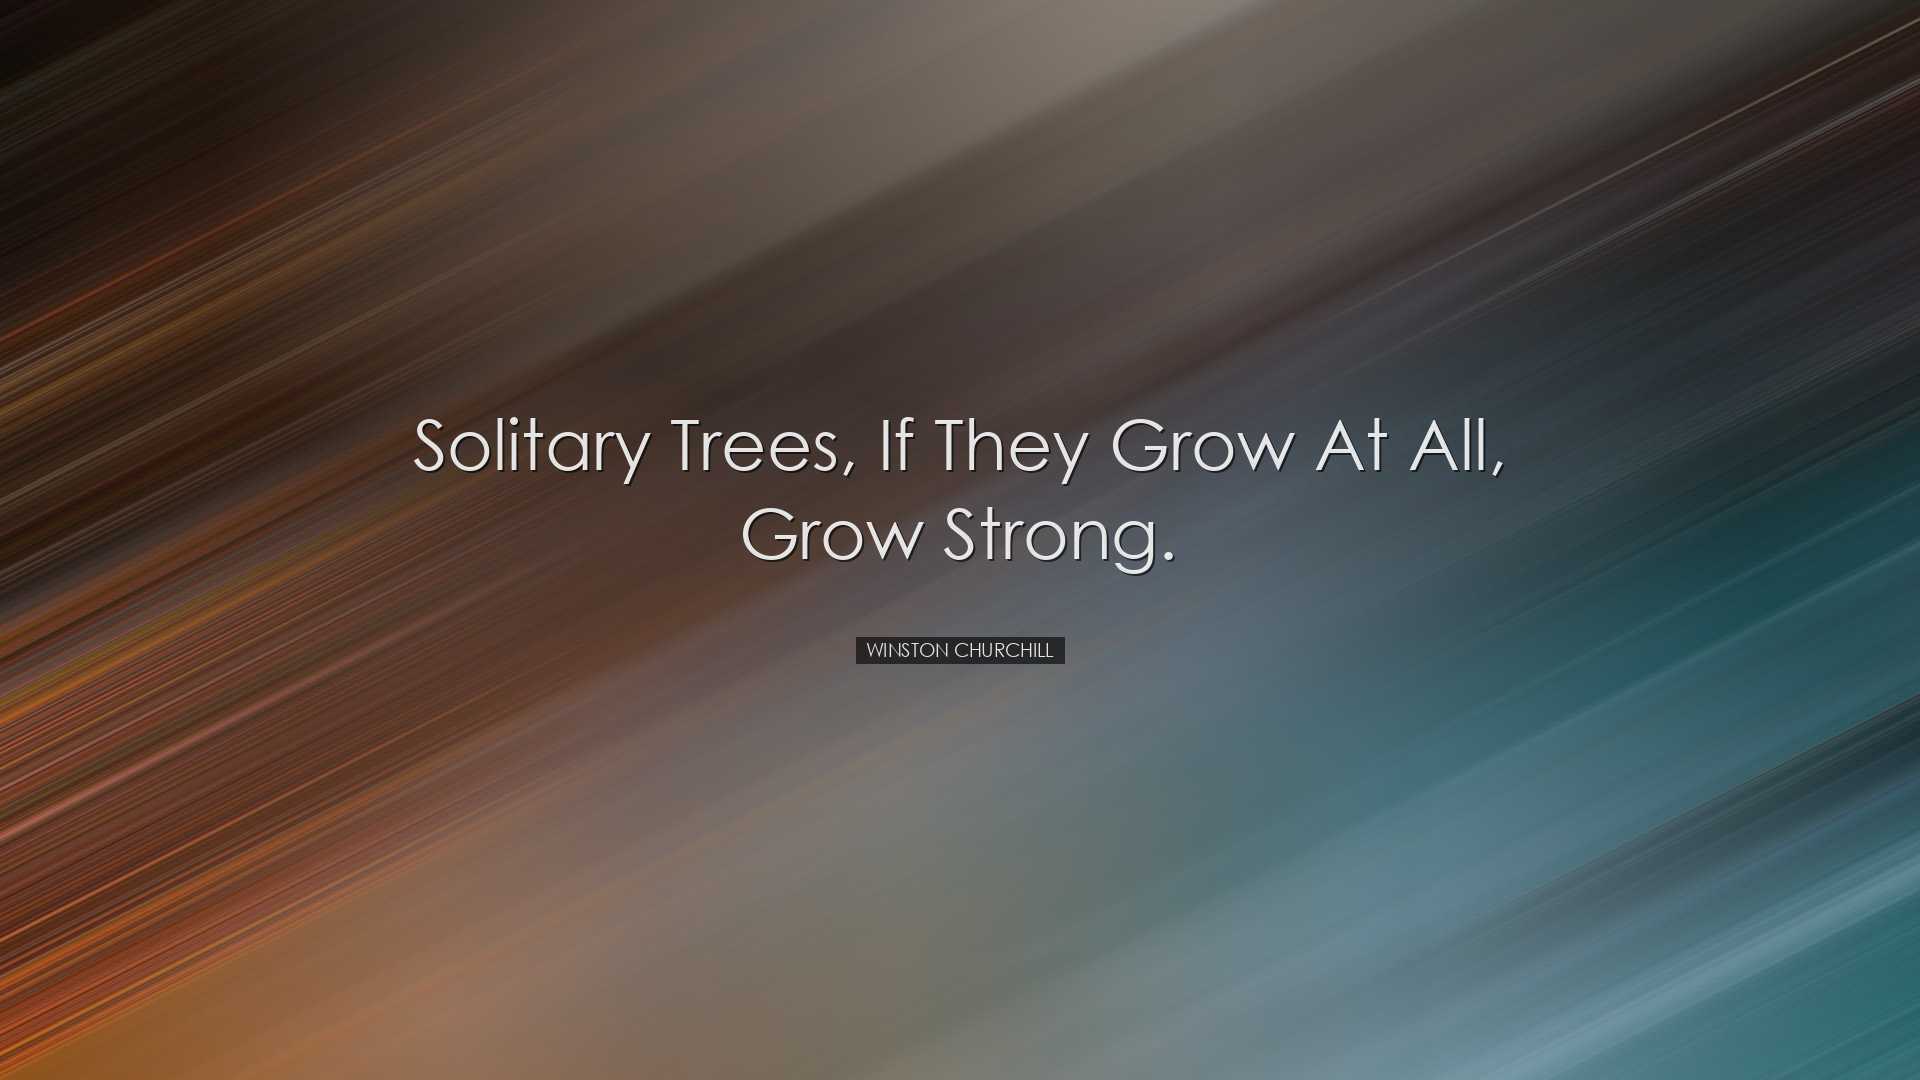 Solitary trees, if they grow at all, grow strong. - Winston Church